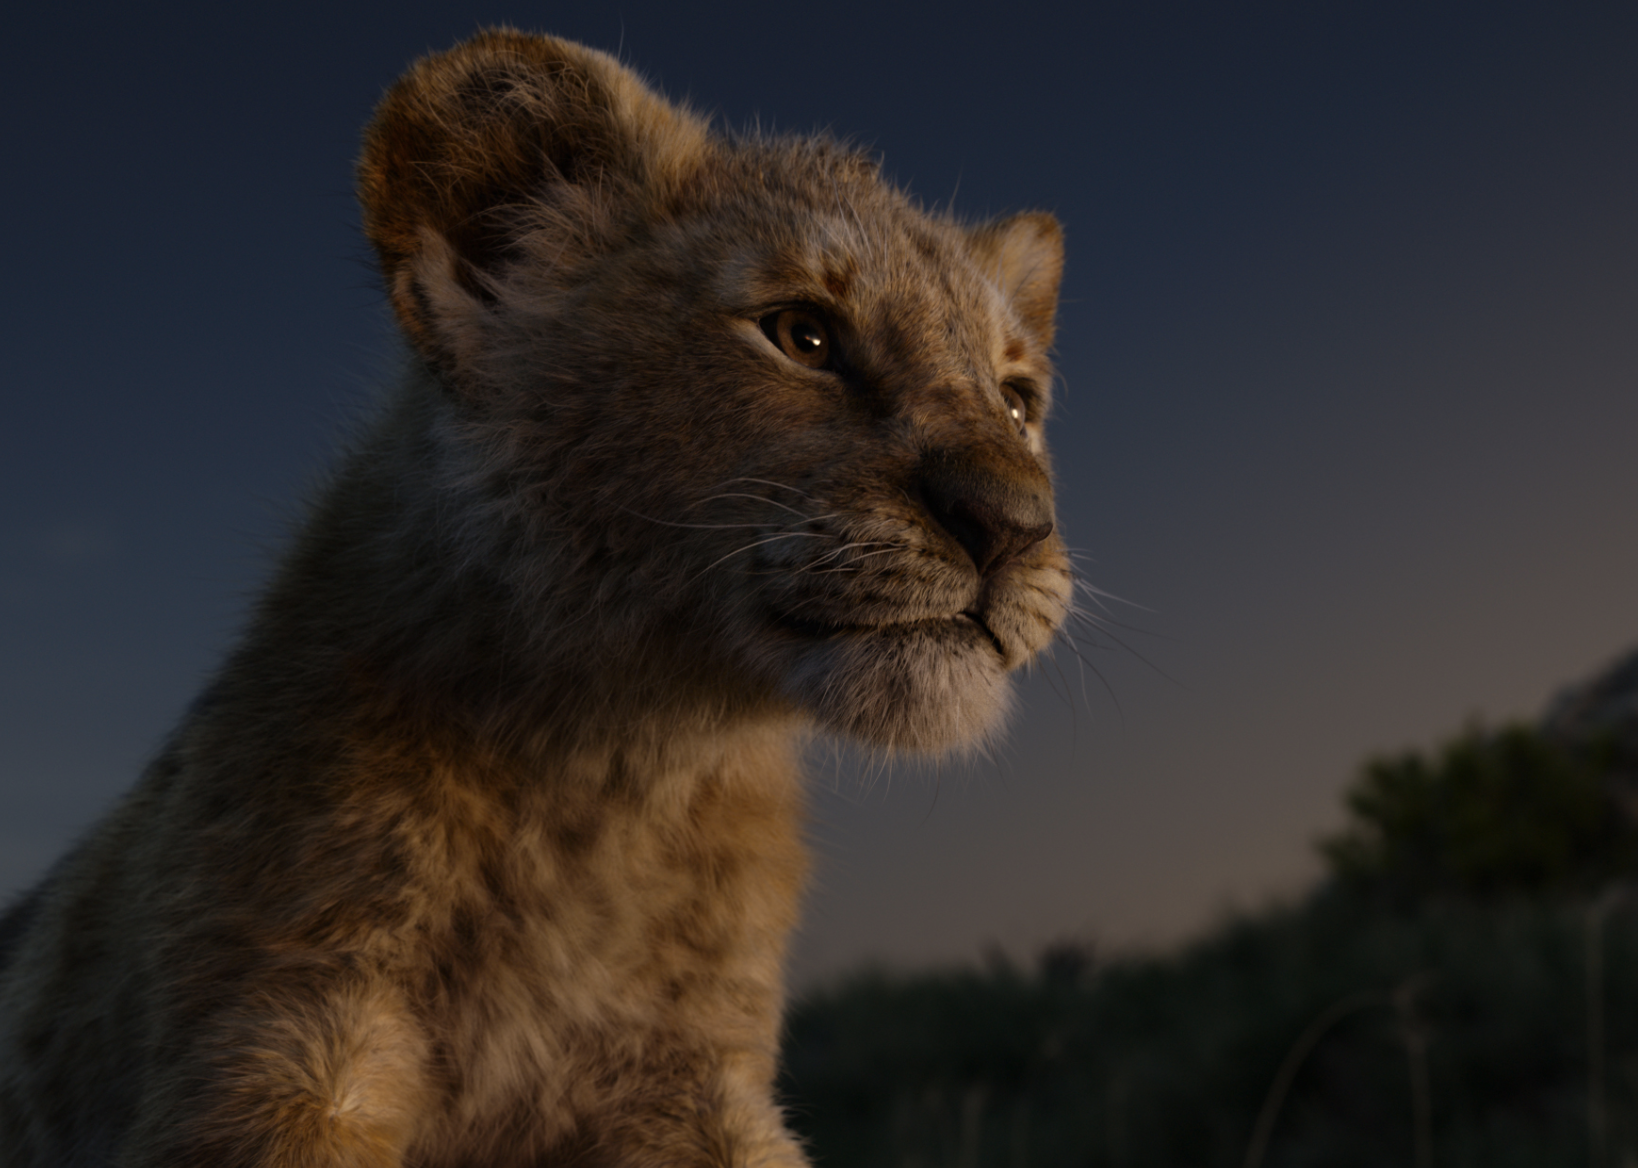 A scene with Simba as a cub at night from "The Lion King"